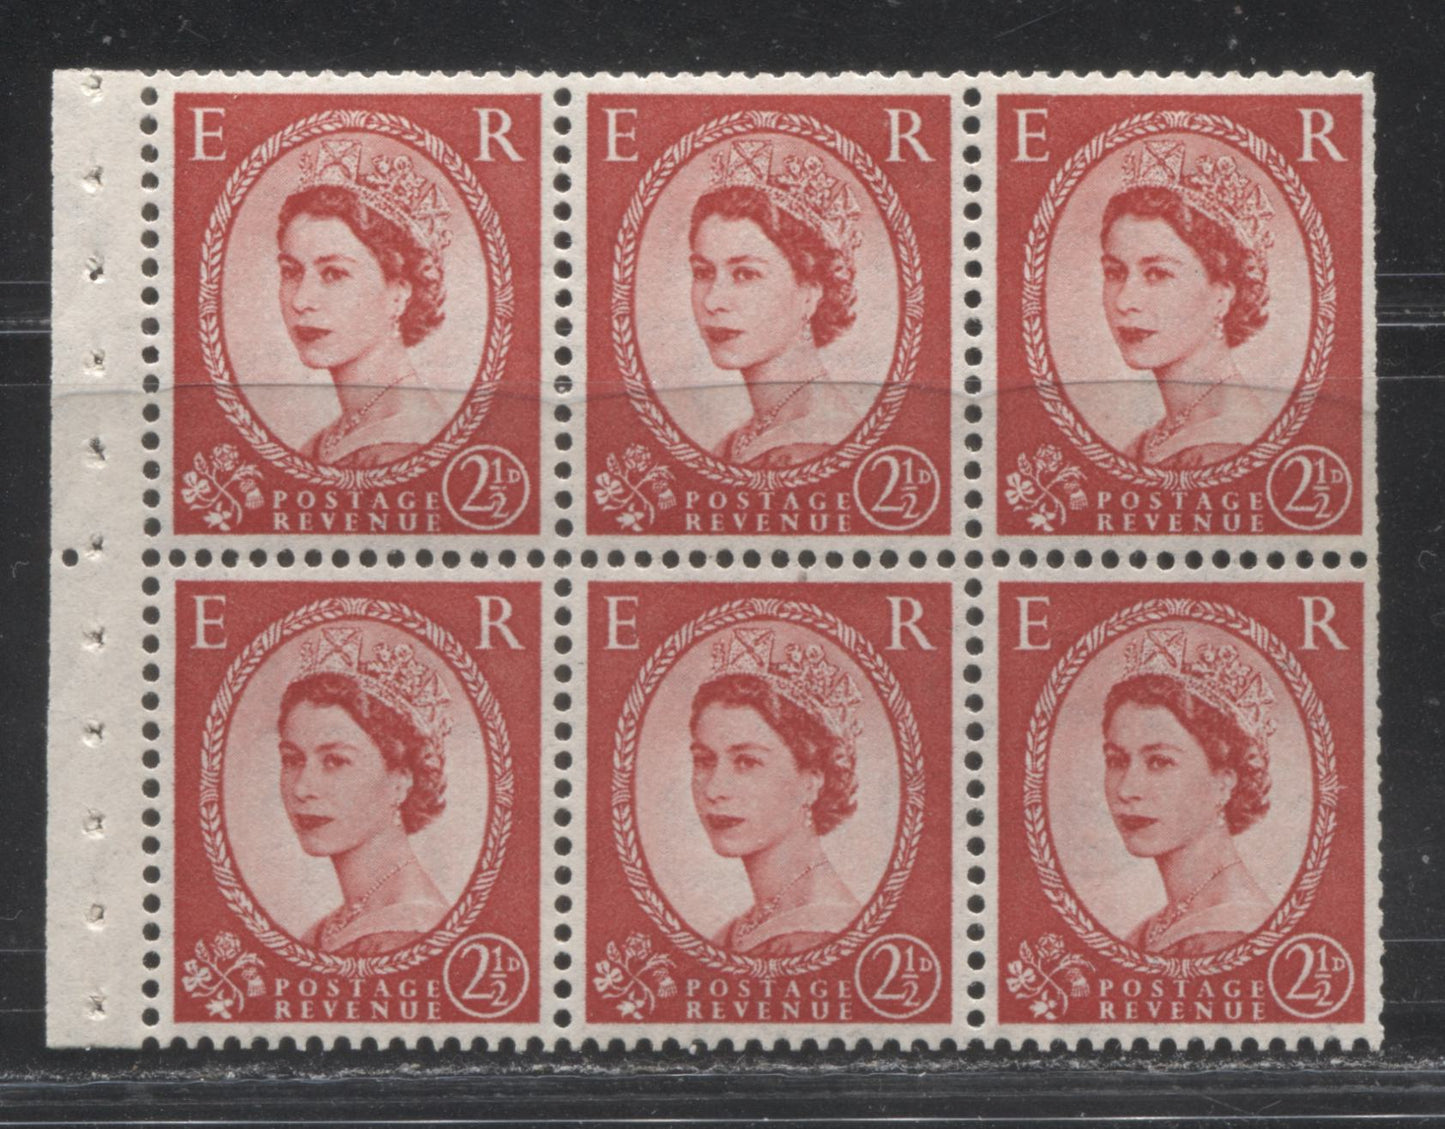 Great Britain SG#F59 2/6d Dull Green & Black Cover 1956-1959 Wilding Issue, A Complete Booklet With Mixed Upright and Inverted St. Edward's Crown, Panes of 6, Type B GPO Cypher, October 1957